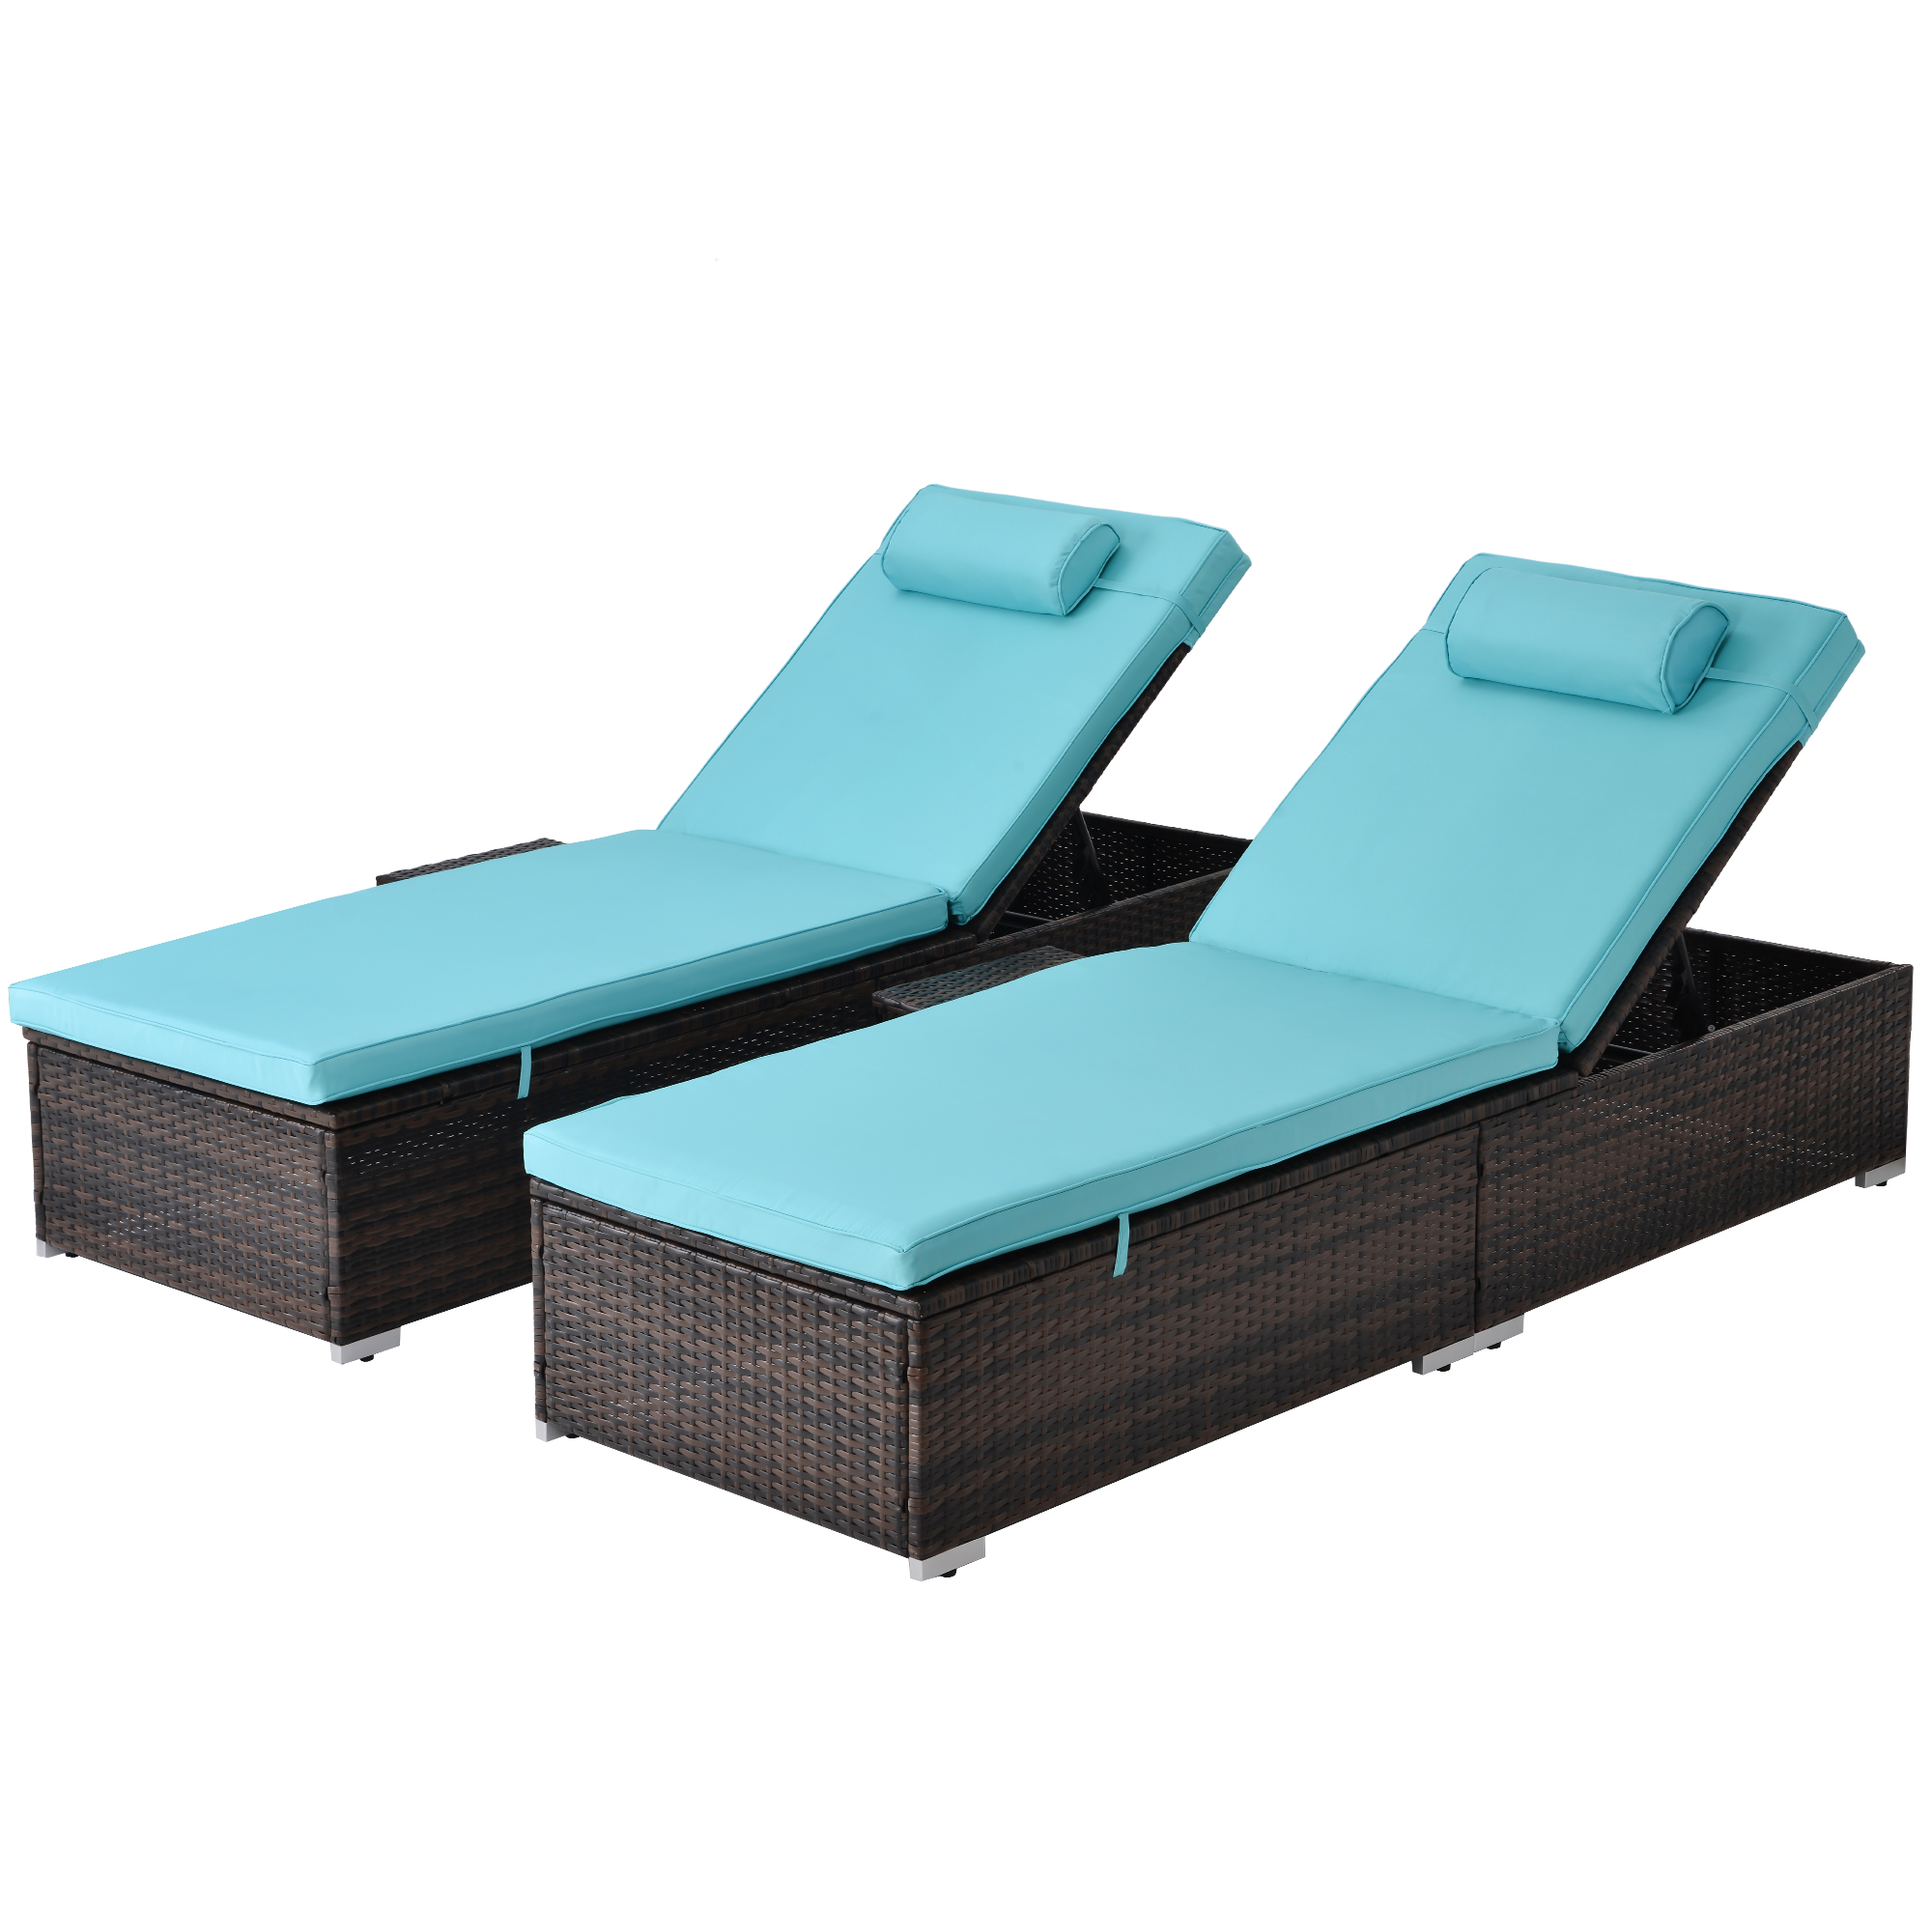 ENYOPRO 2 Piece Outdoor Chaise Lounge Chairs, Adjustable Chaise Chairs with Side Table, Head Pillow and Cushions, for Outdoor Patio Beach Pool Backyard PE Rattan Reclining Chairs Furniture Set, K2697 - image 3 of 11